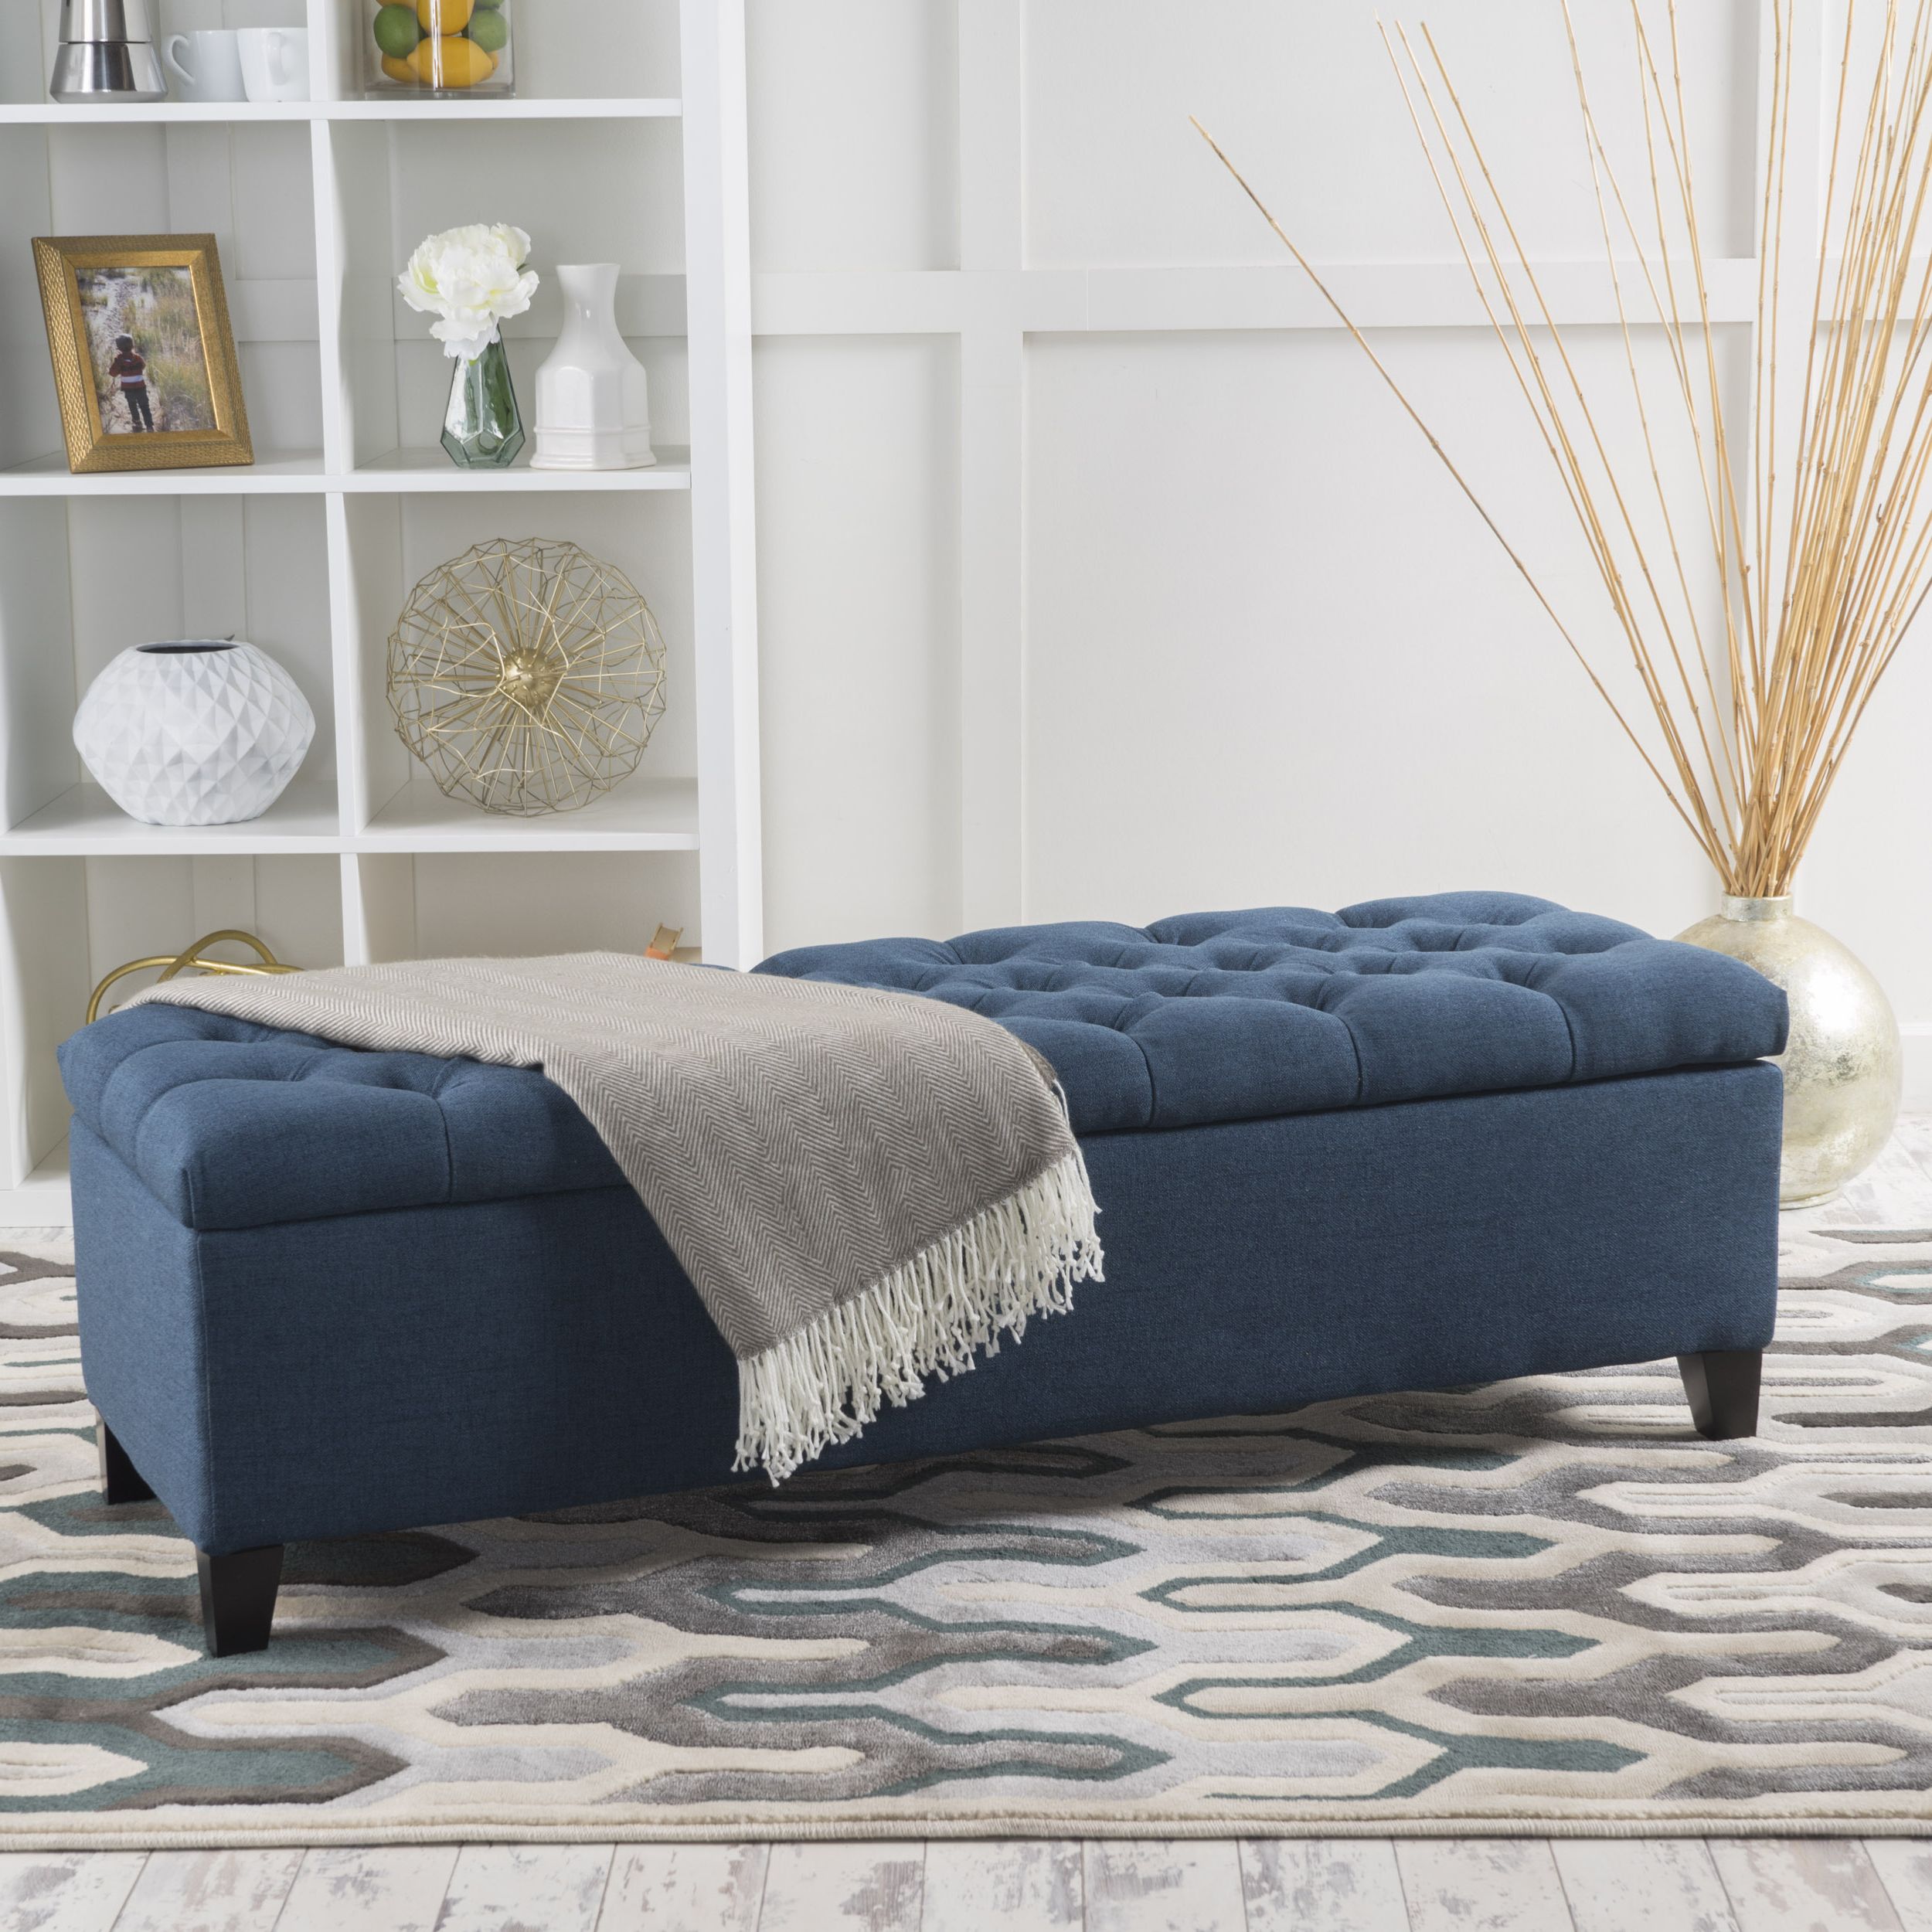 Popular Blue Fabric Tufted Surfboard Ottomans Throughout Noble House Paskal Tufted Fabric Storage Ottoman, Dark Blue – Walmart (View 5 of 10)